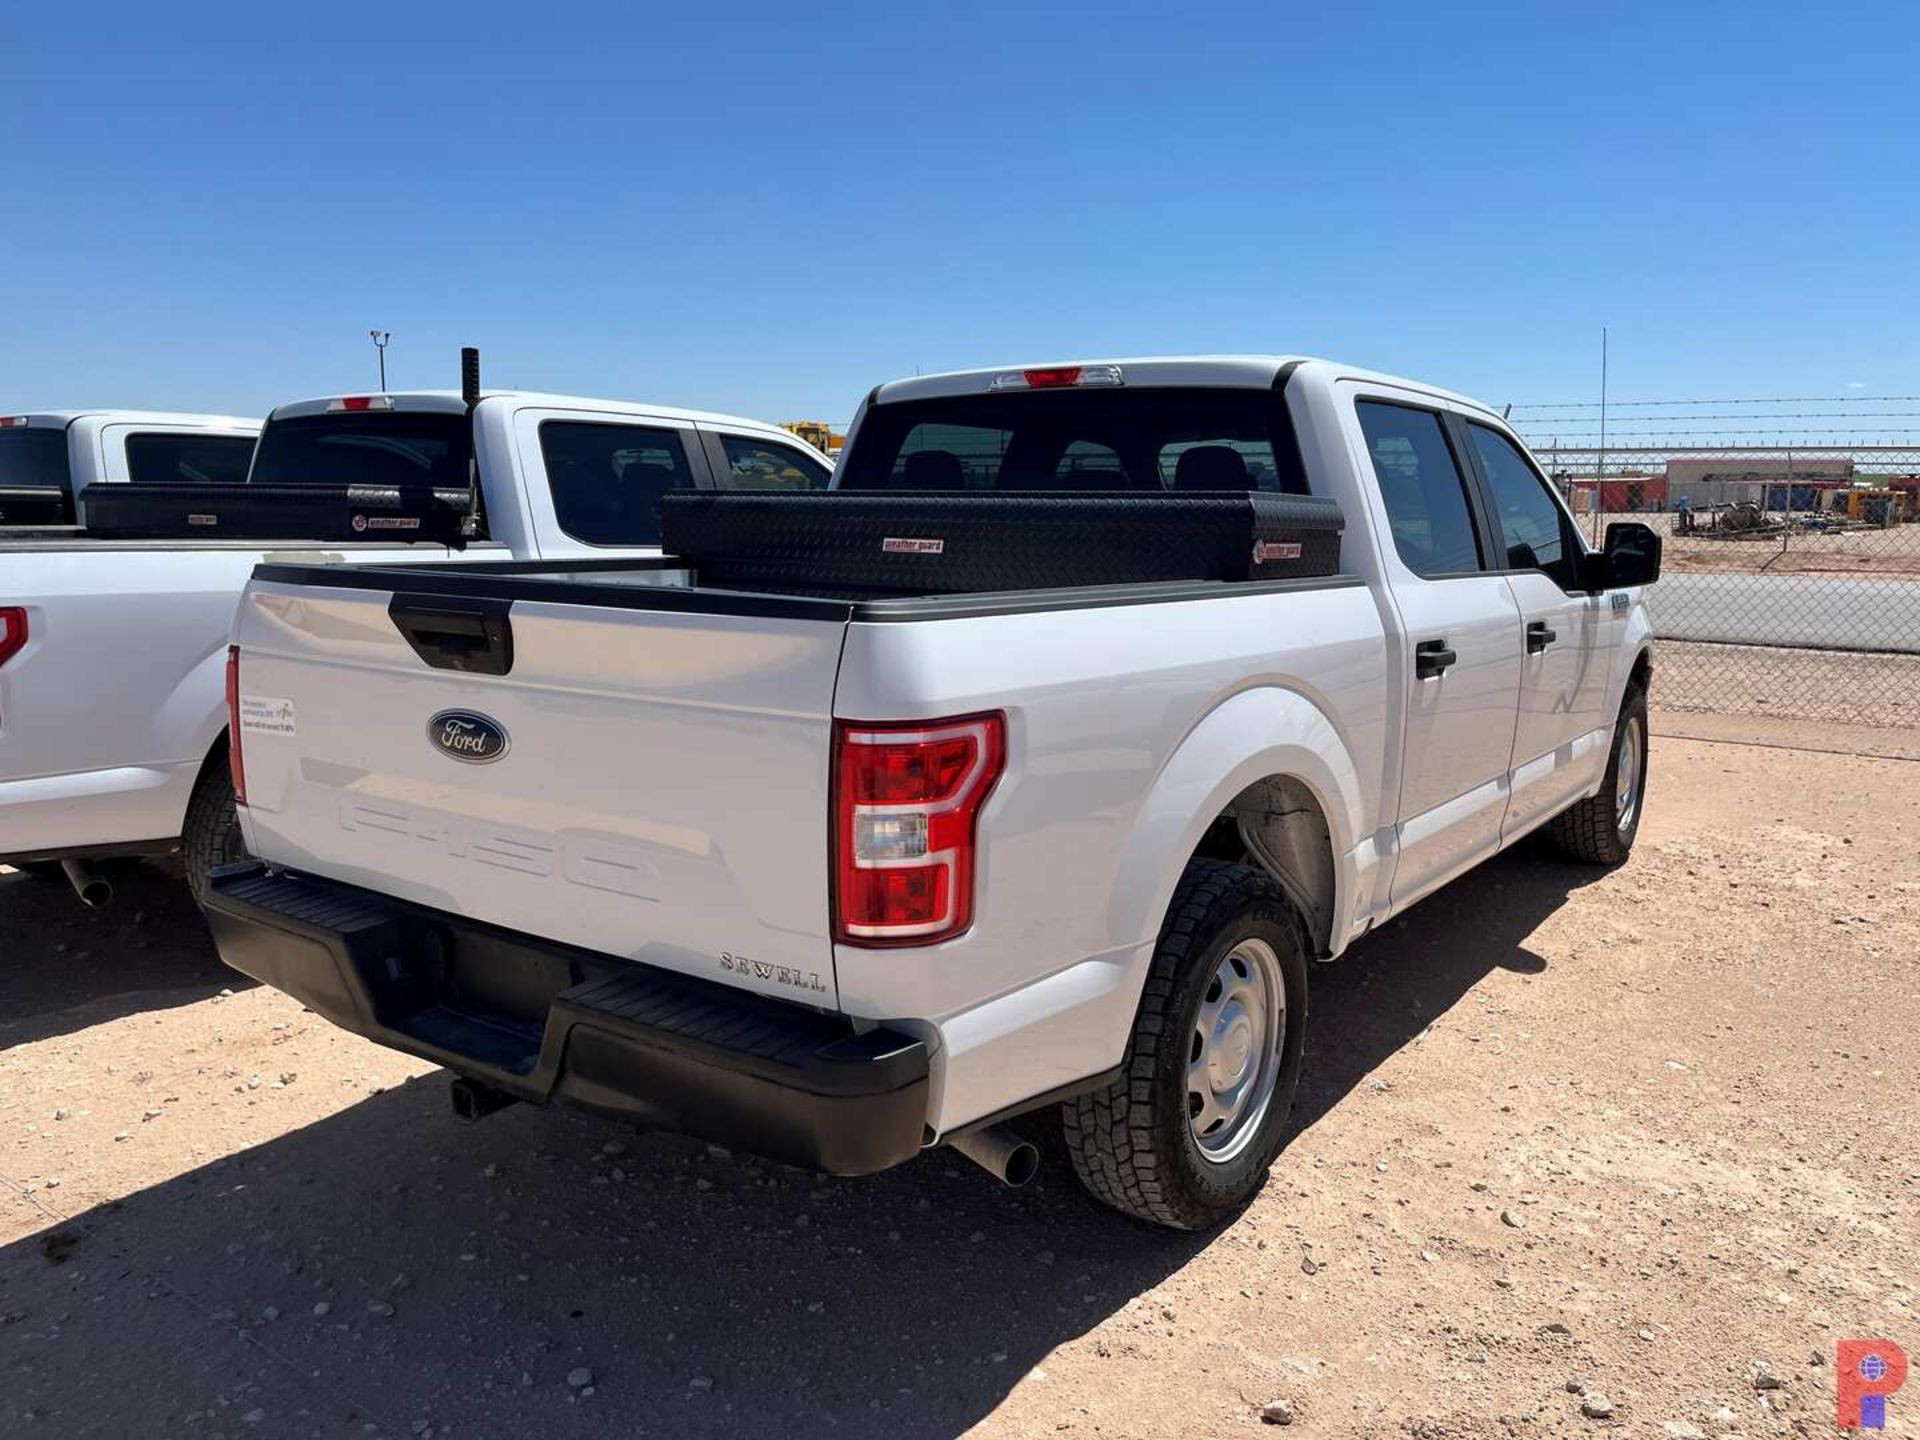 2019 FORD F-150 CREW CAB PICKUP TRUCK - Image 6 of 12